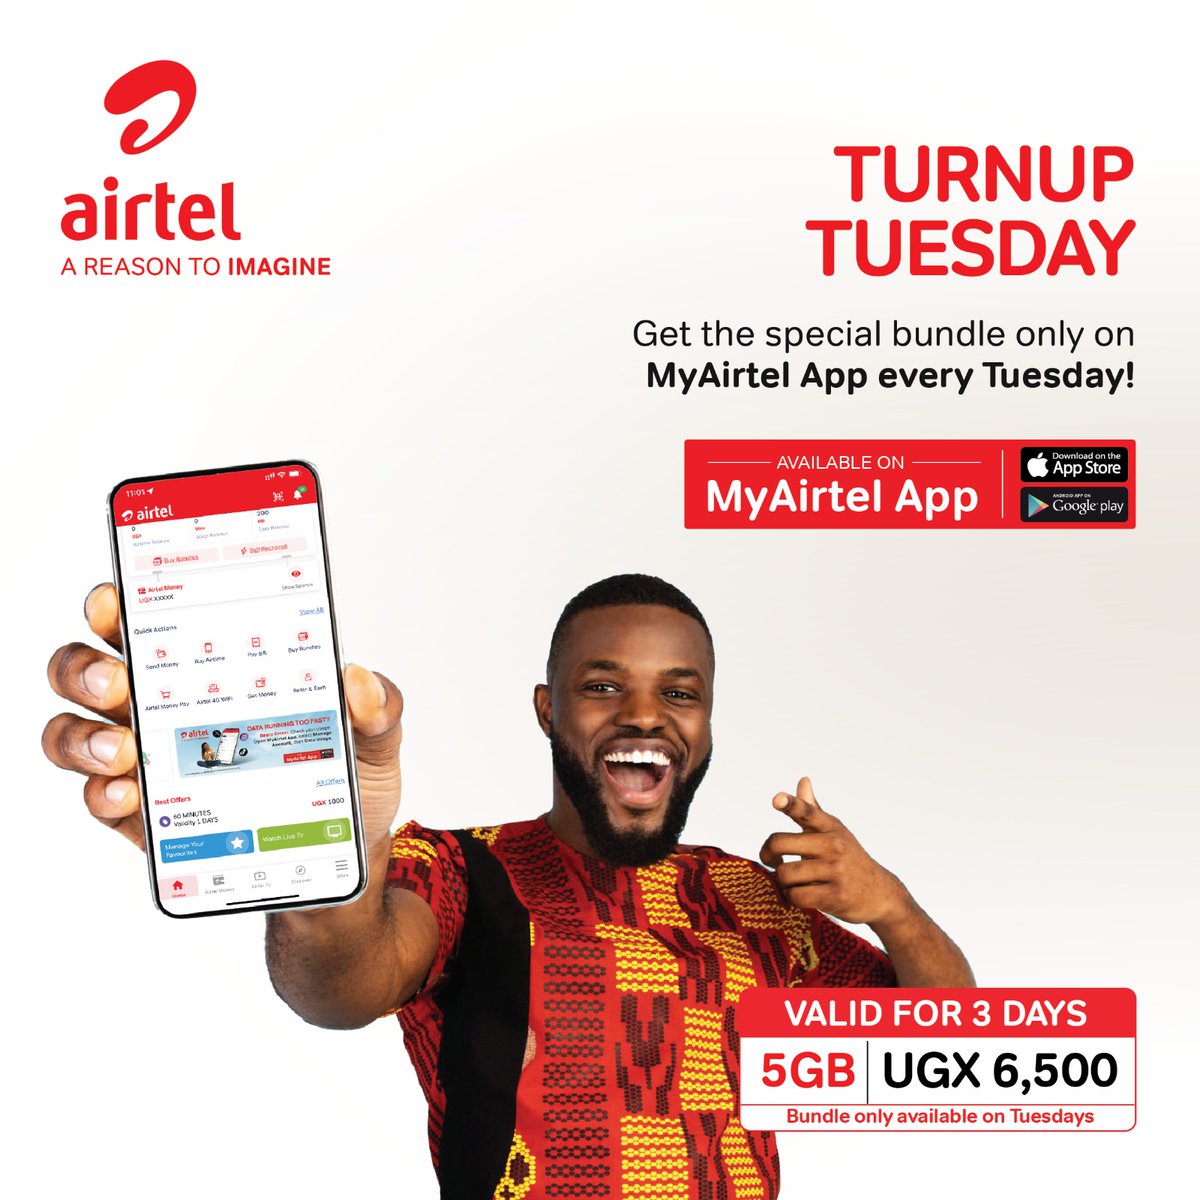 Today you get that offer that lasts 3 days so better get it now and enjooyyy endless internet at just 6500 . Offer available only on #MyAirtelApp.   airtelafrica.onelink.me/cGyr/qgj4qeu2

#TurnUpTuesday